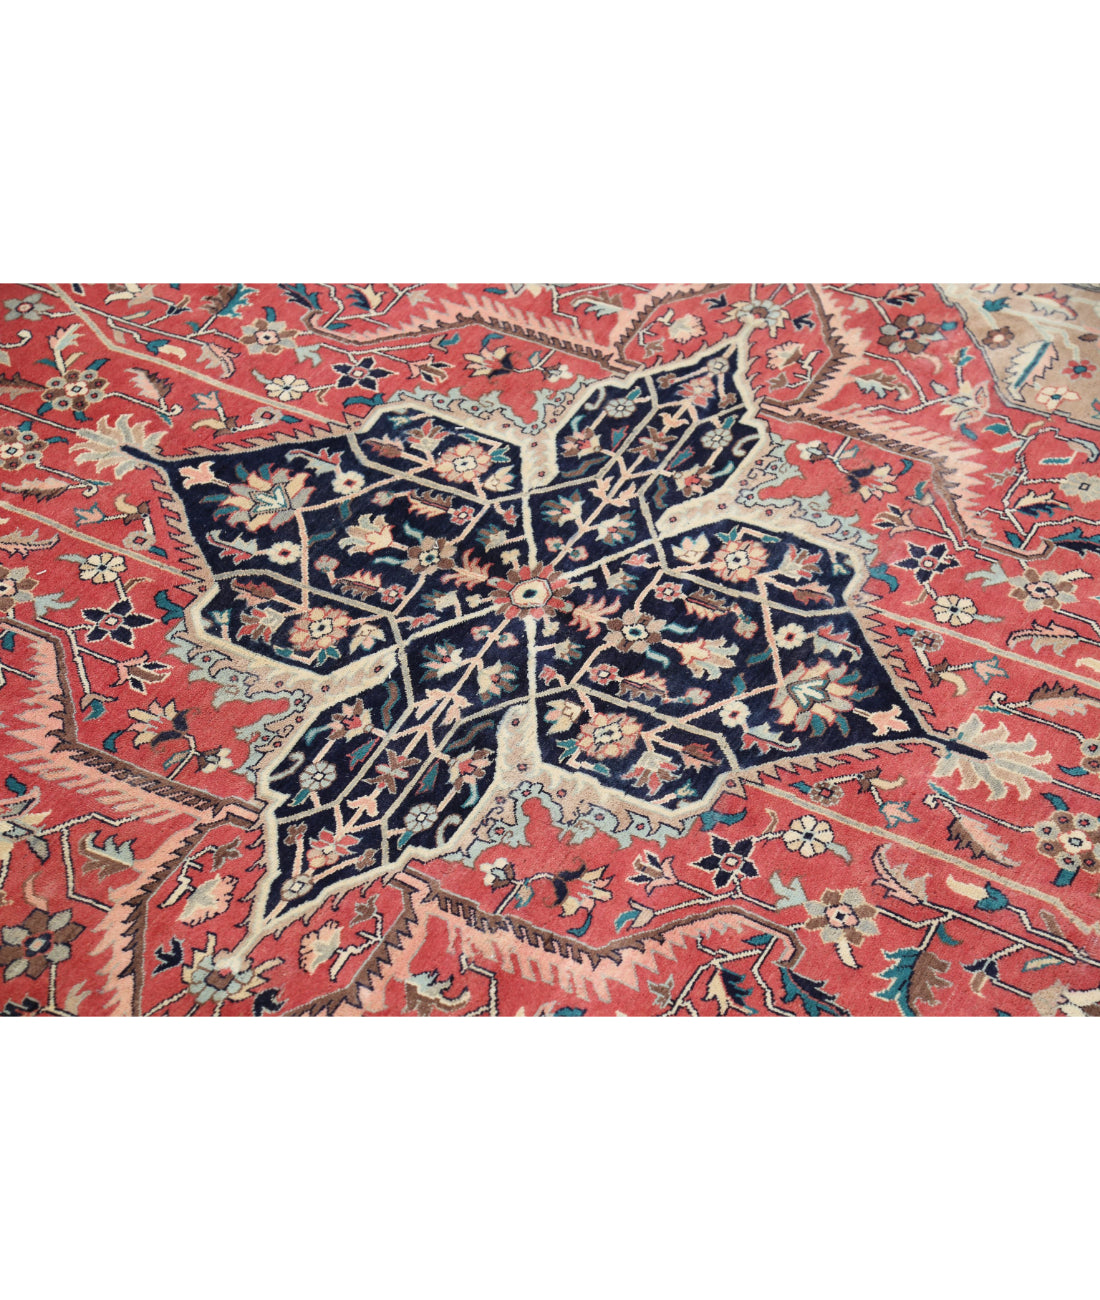 Hand Knotted Heritage Persian Style Heriz Wool Rug - 6'0'' x 8'11'' 6'0'' x 8'11'' (180 X 268) / Pink / Blue